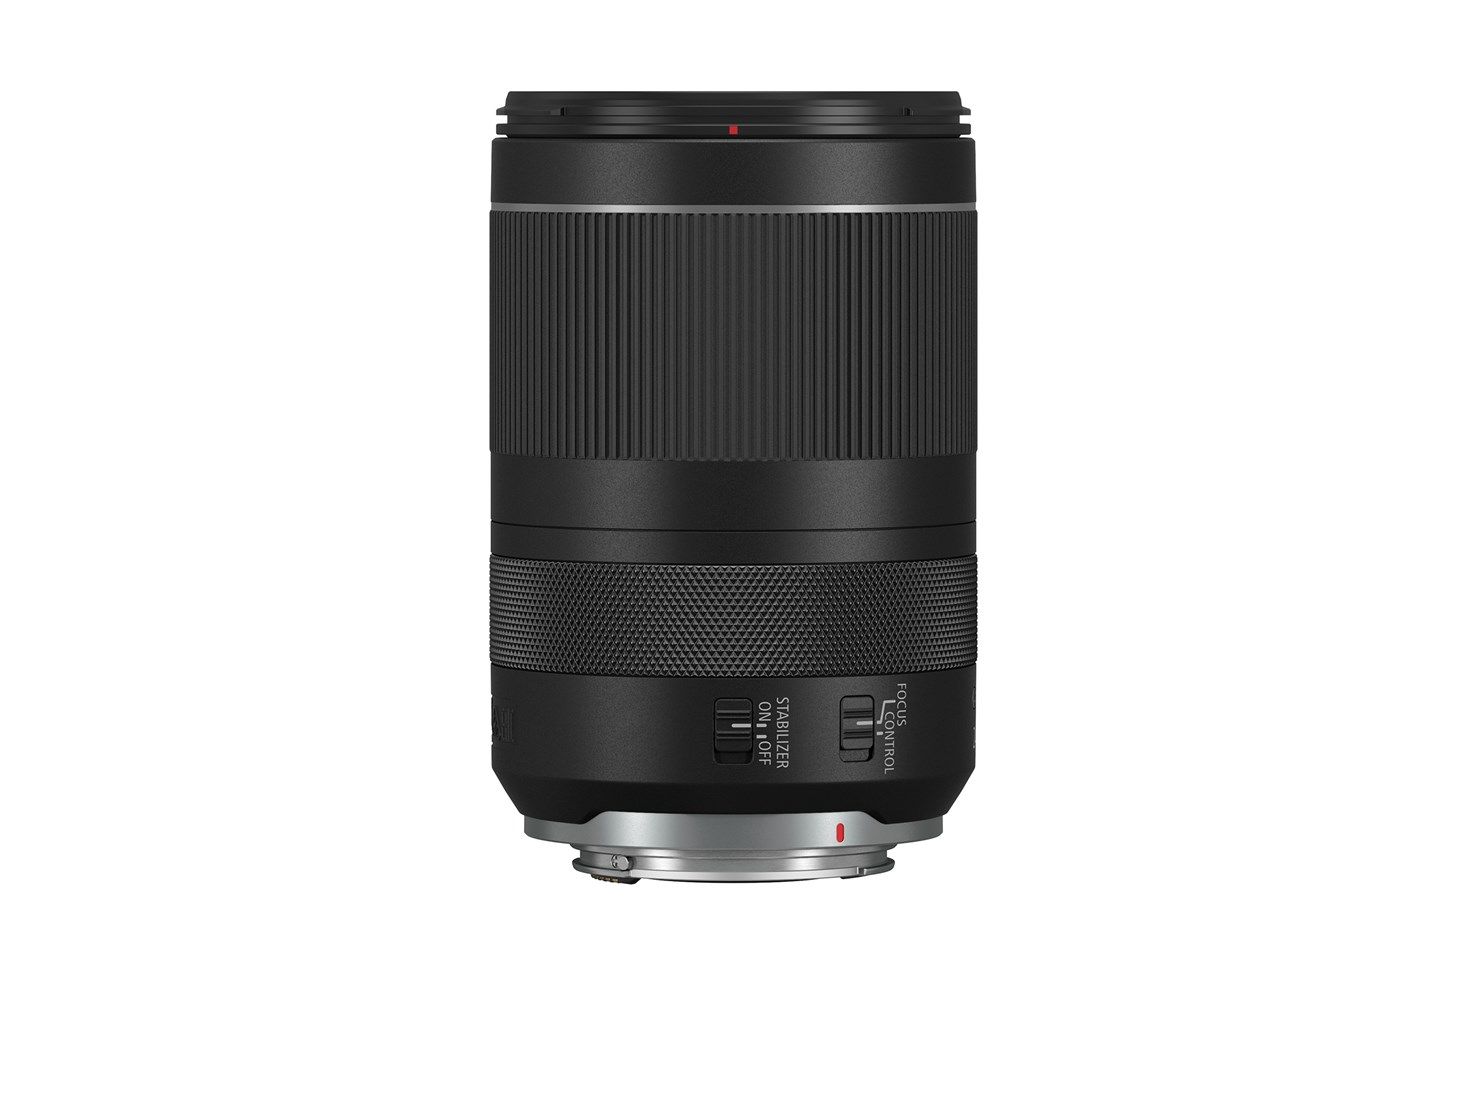 Canon RF 24-240mm f4-6.3 IS USM Lens For EOS R System